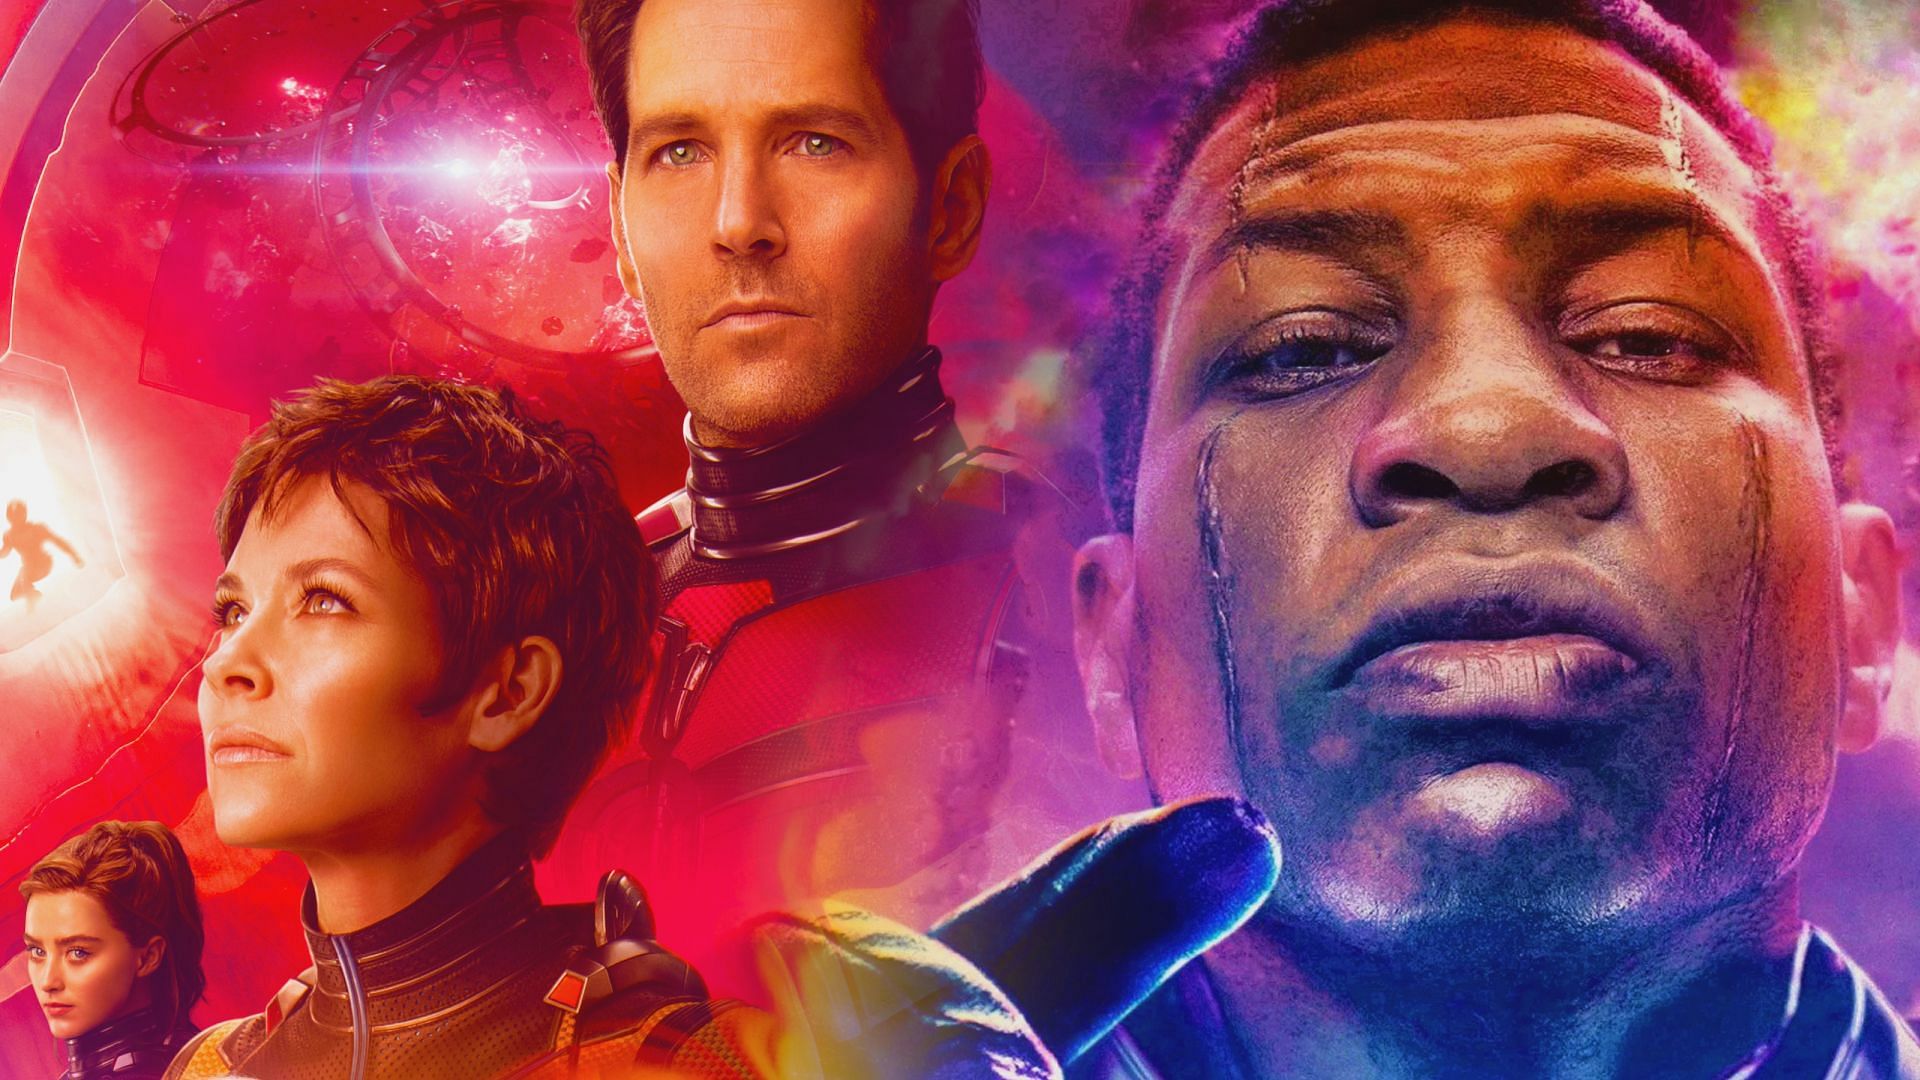 Marvel Studios Sets Historically Bad Box Office Record With Ant-Man:  Quantumania